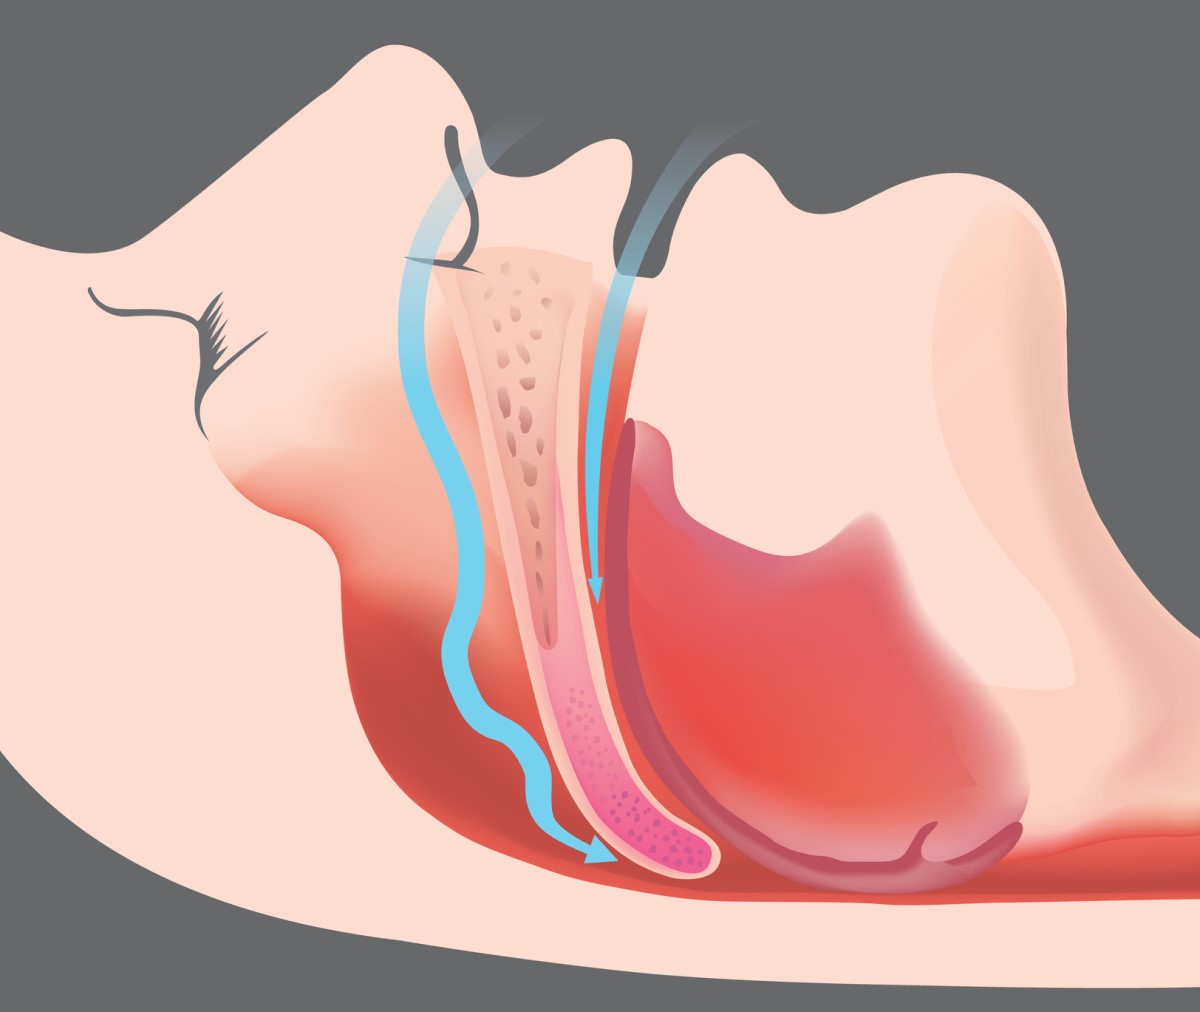 Obstructive apnoea and airway obstruction - animated picture and airway model